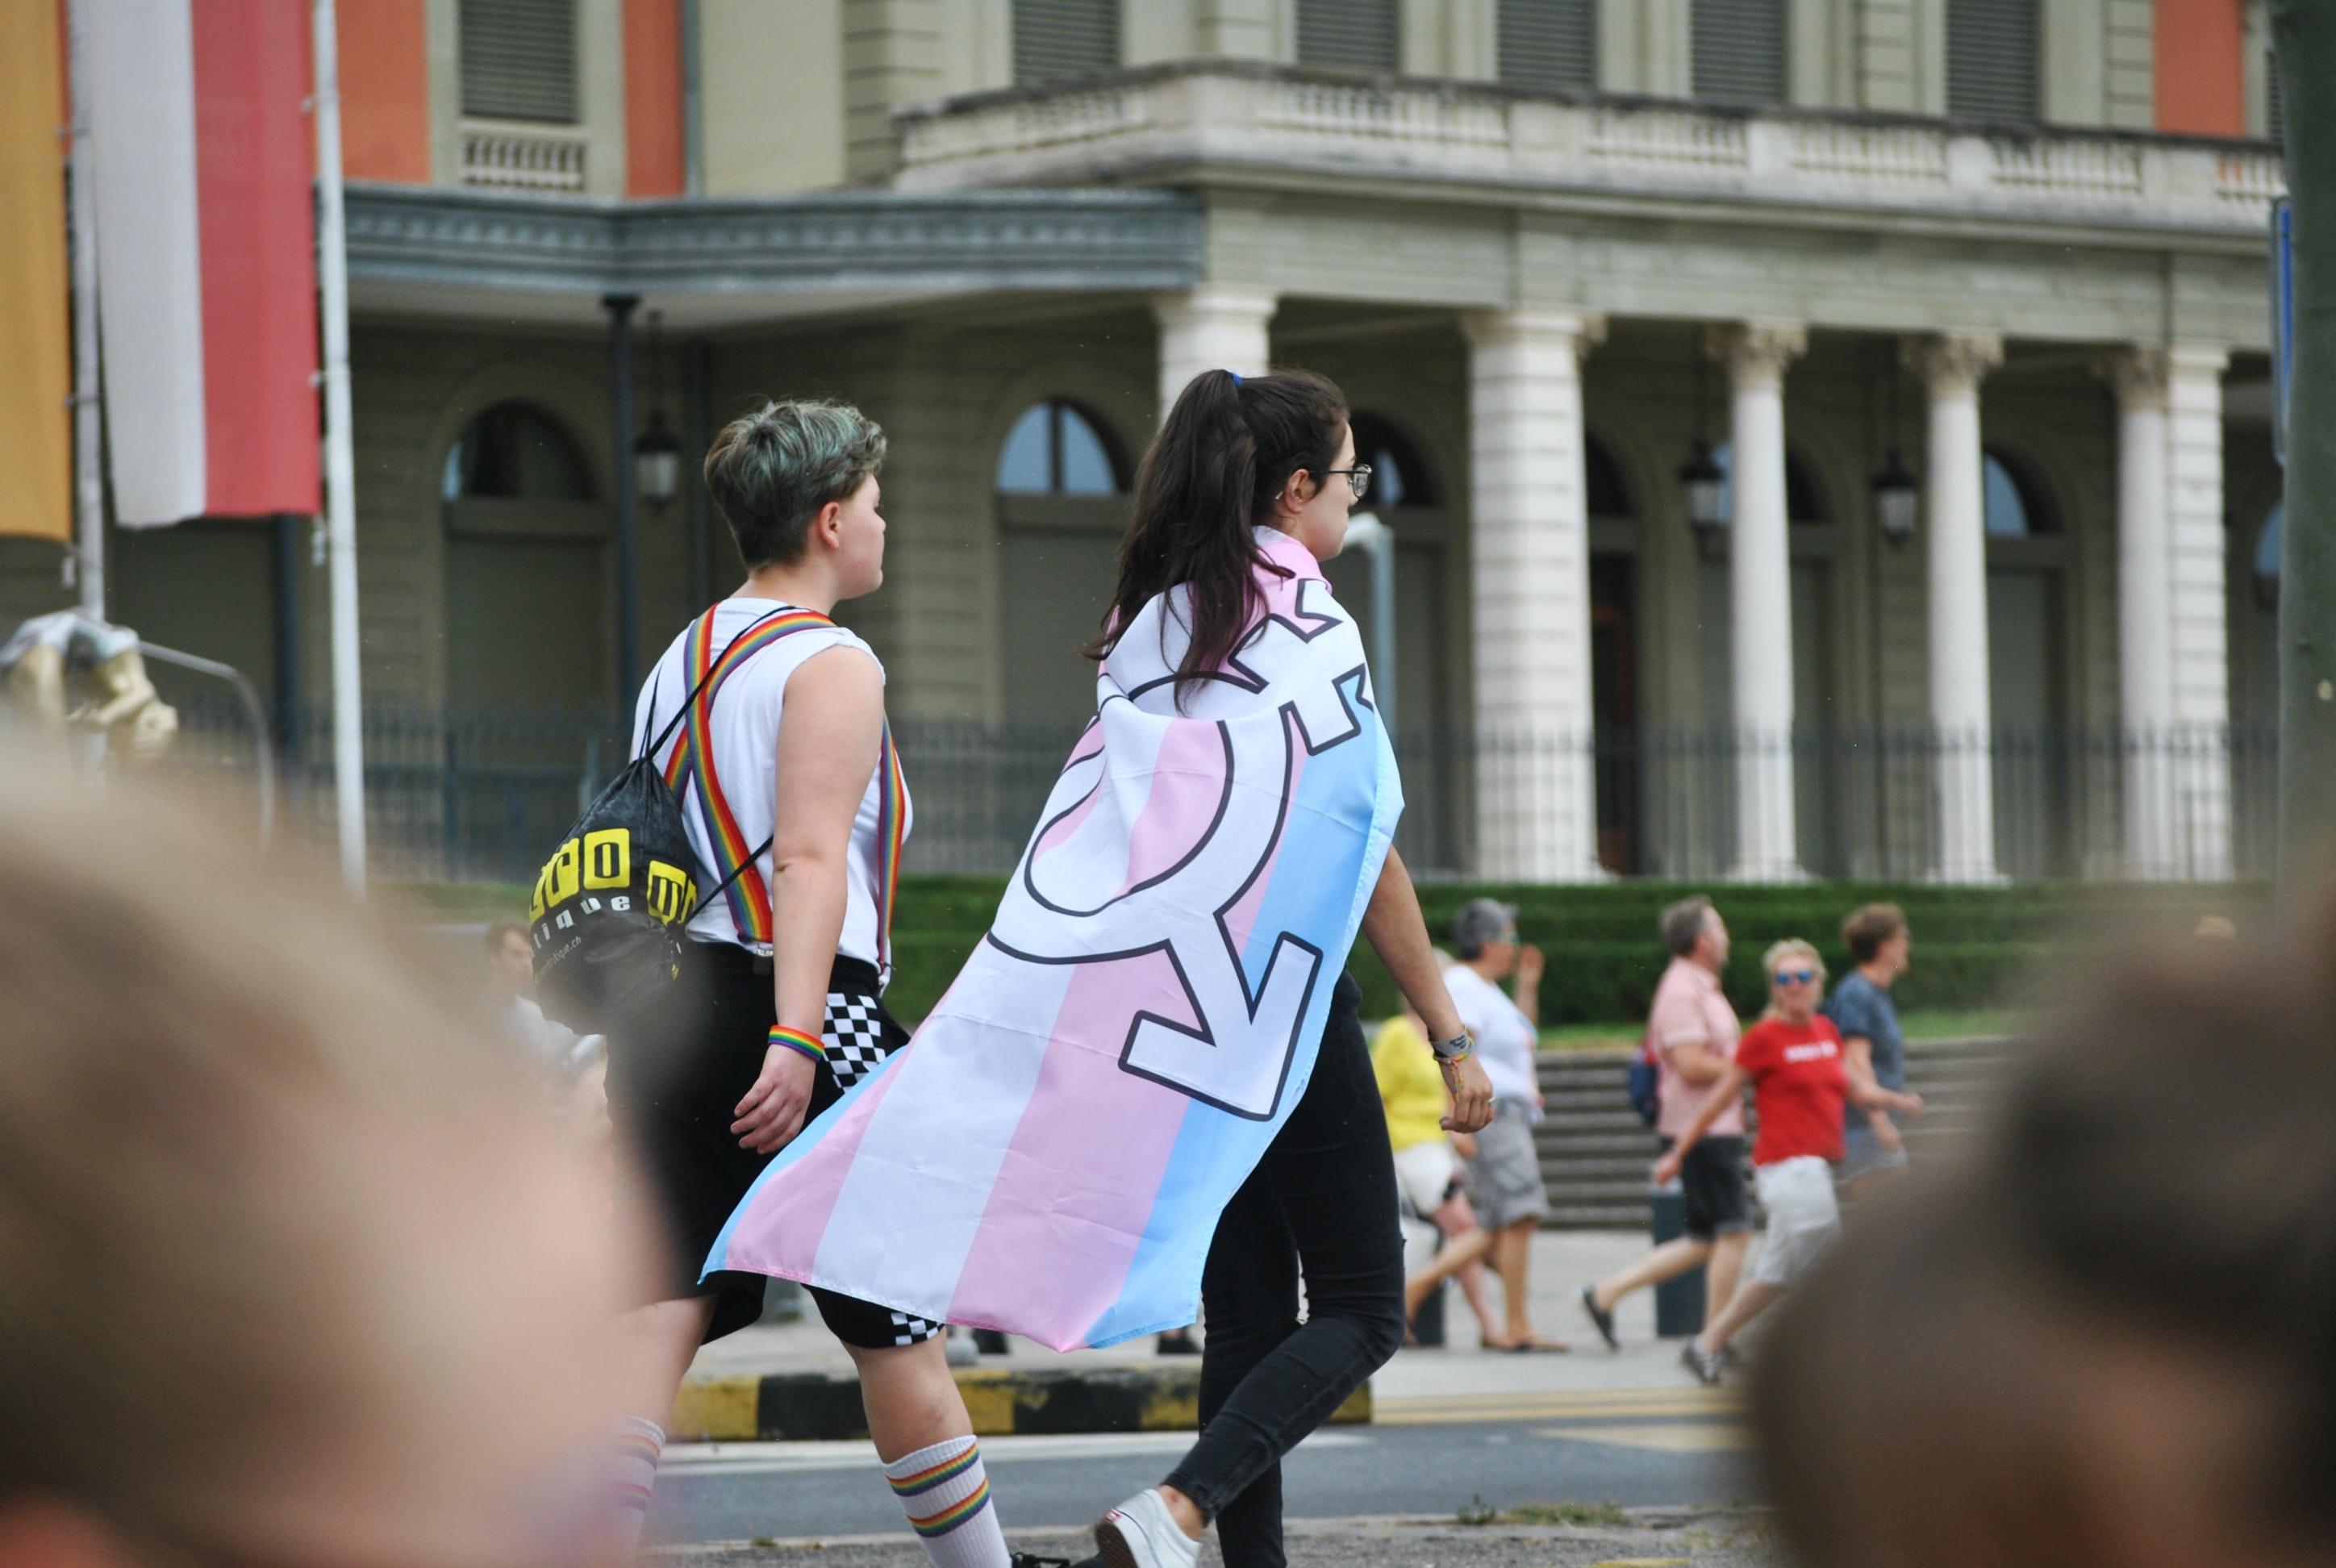 Two people walking, one wearing the trans pride flag